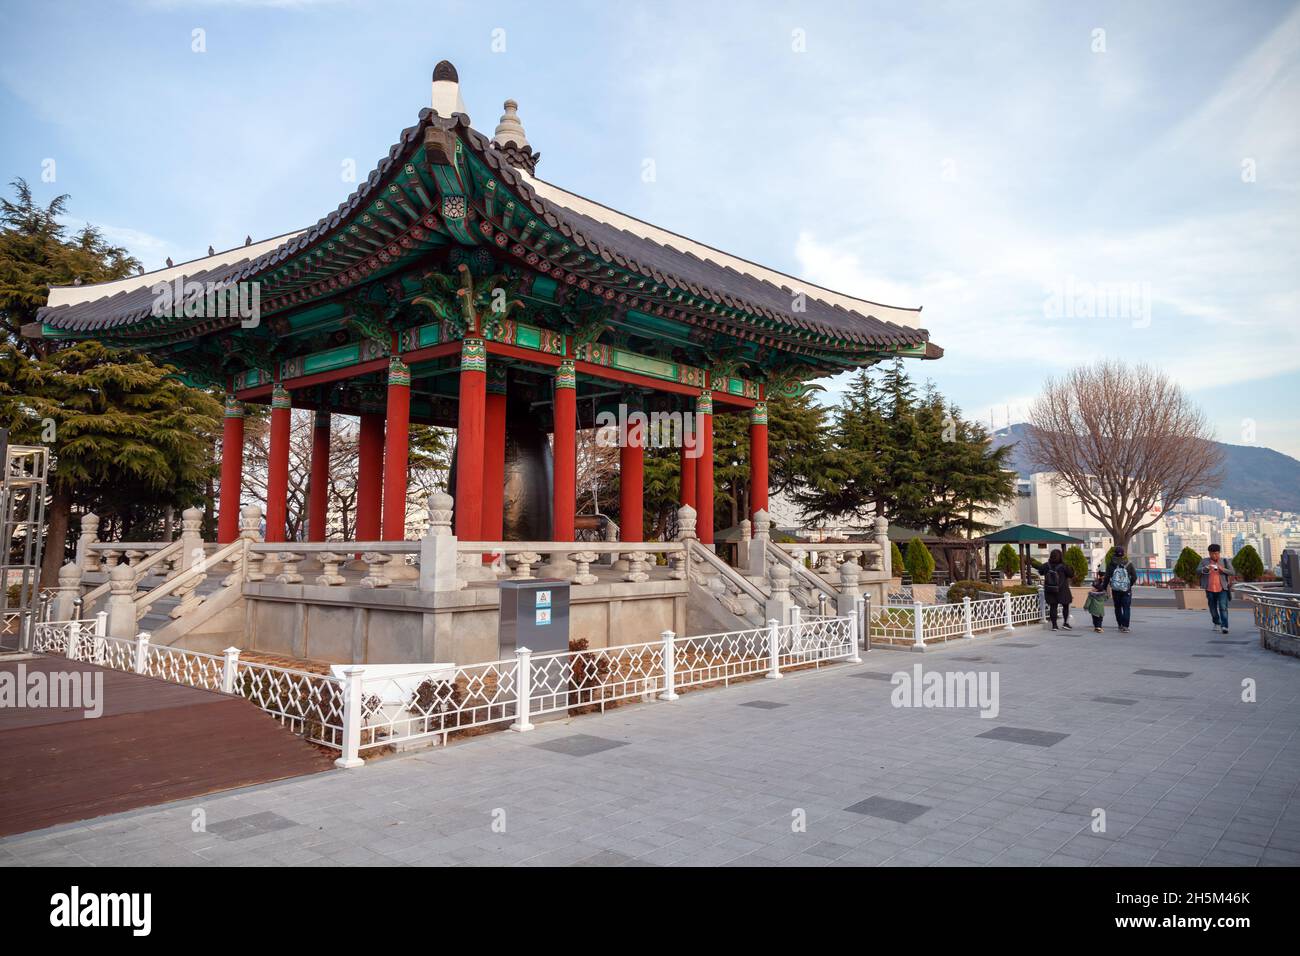 Busan, South Korea - March 14, 2018: The bell pavilion located at Yongdusan Park, tourists walk nearby Stock Photo